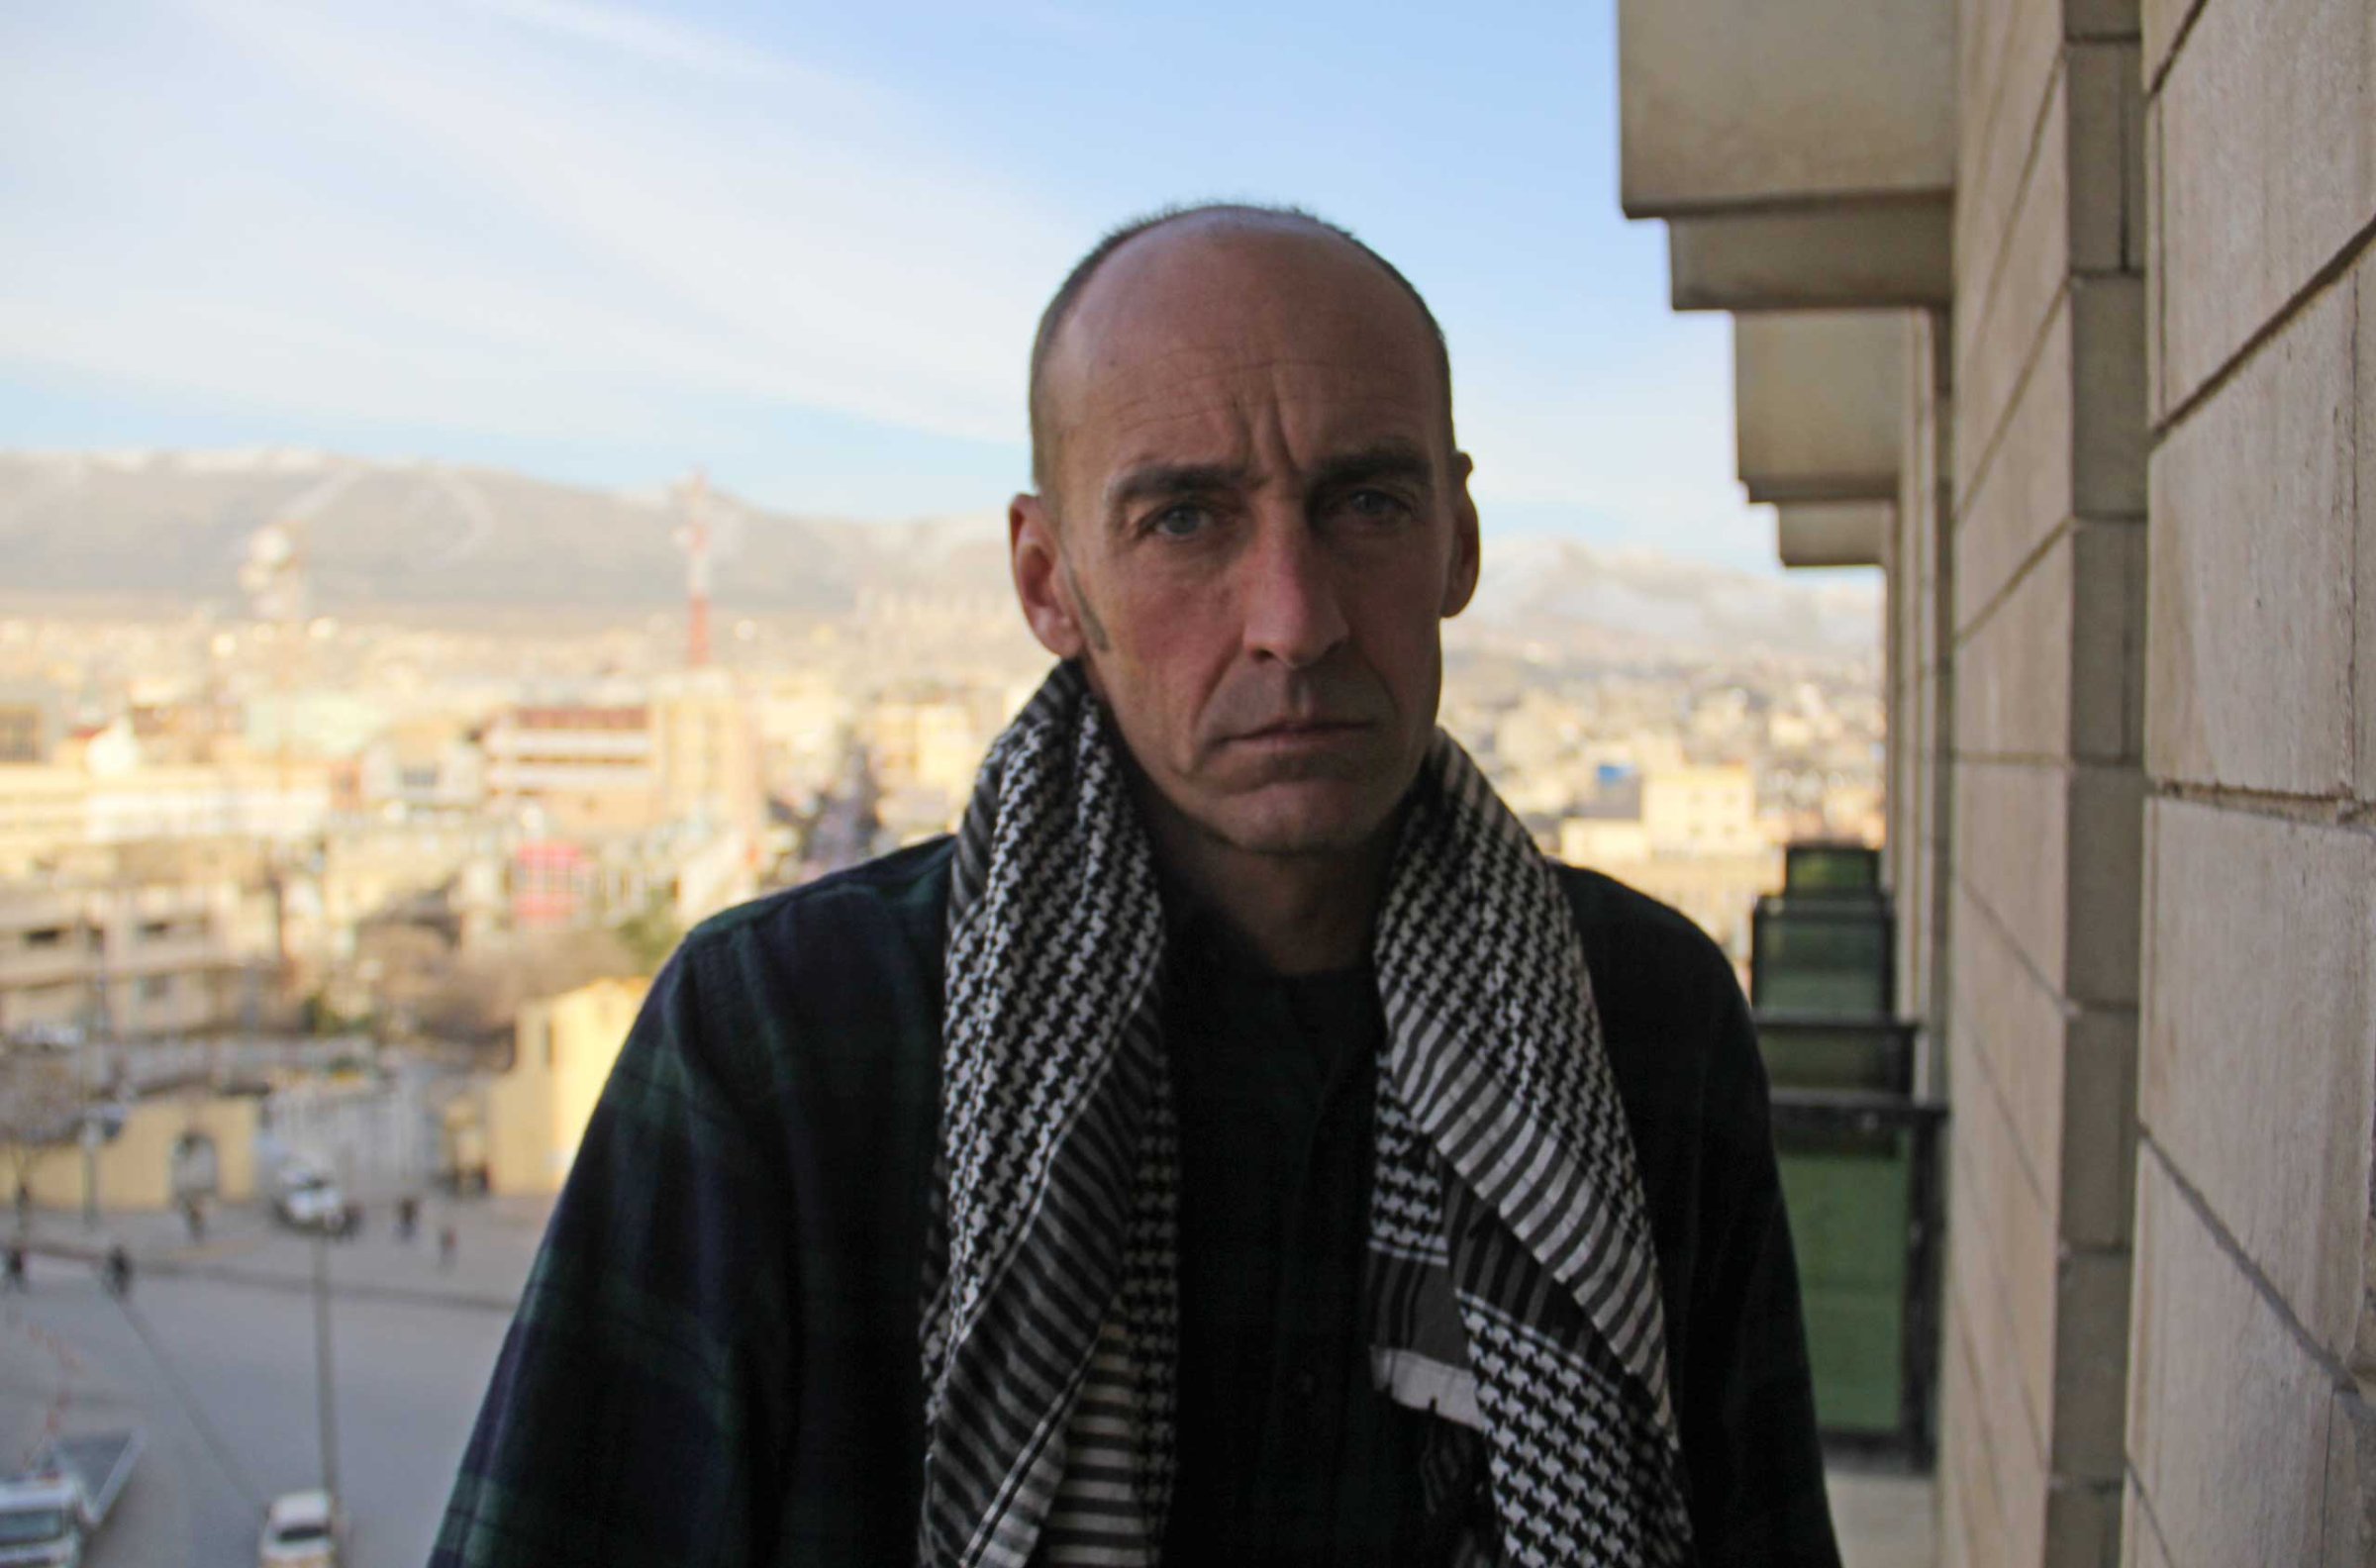 Dean Parker in the Iraqi Kurdish city of Sulaymaniah after spending weeks on the front lines with Kurdish fighters in Syria. Jan. 14, 2015.